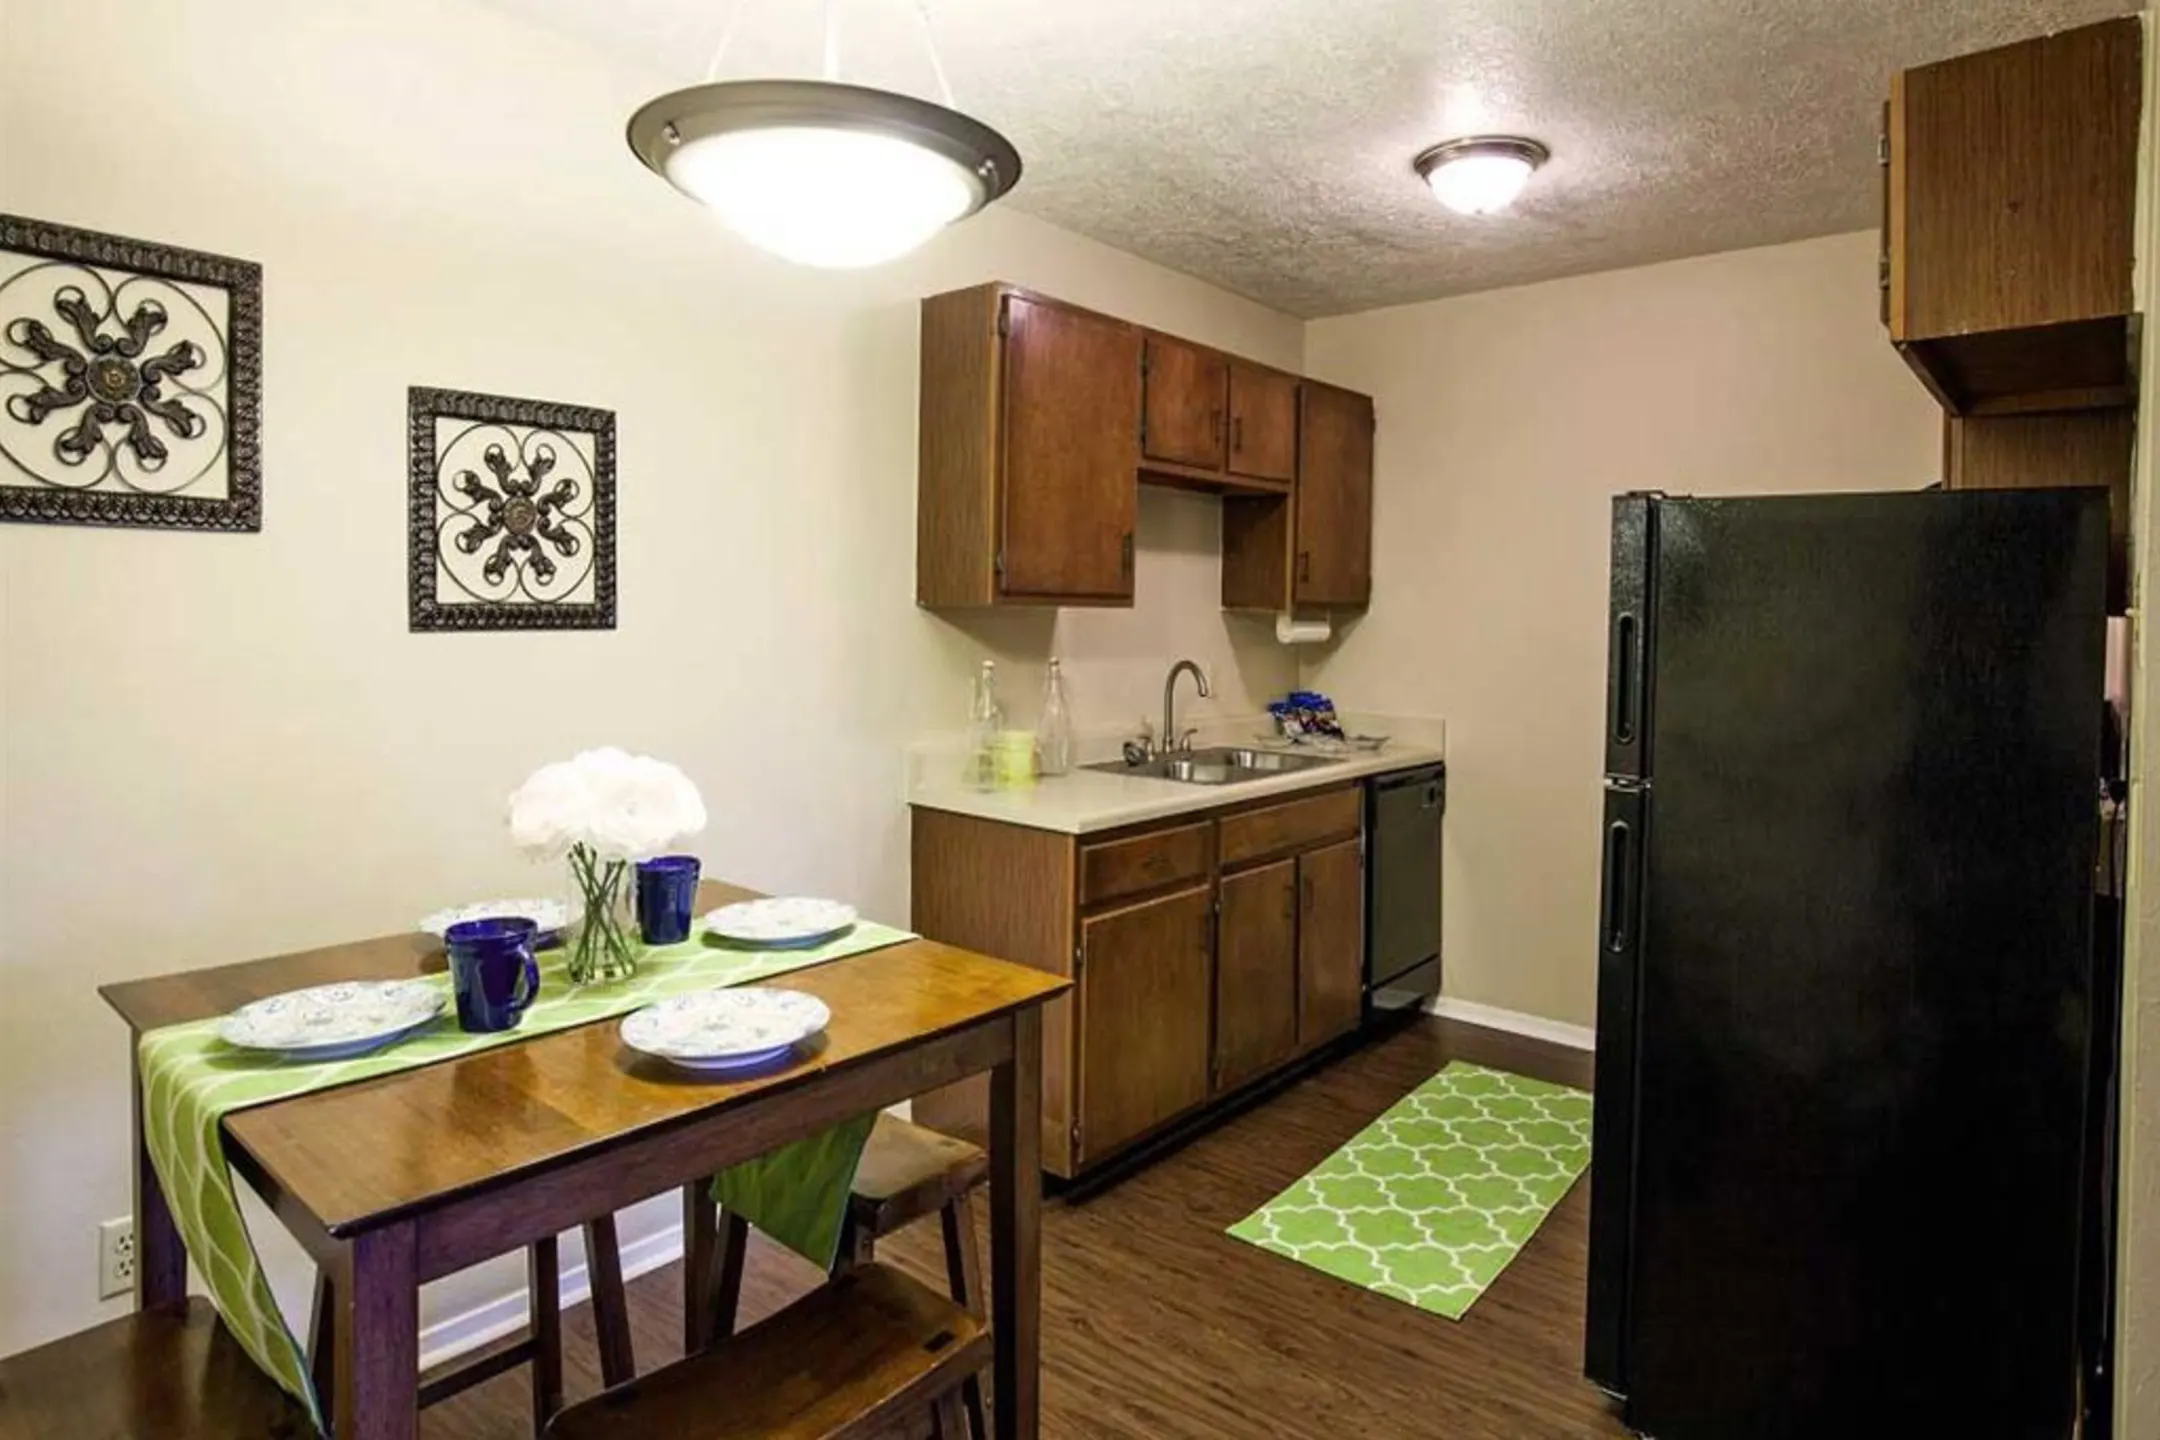 Hunters Point Apartments - College Station, TX